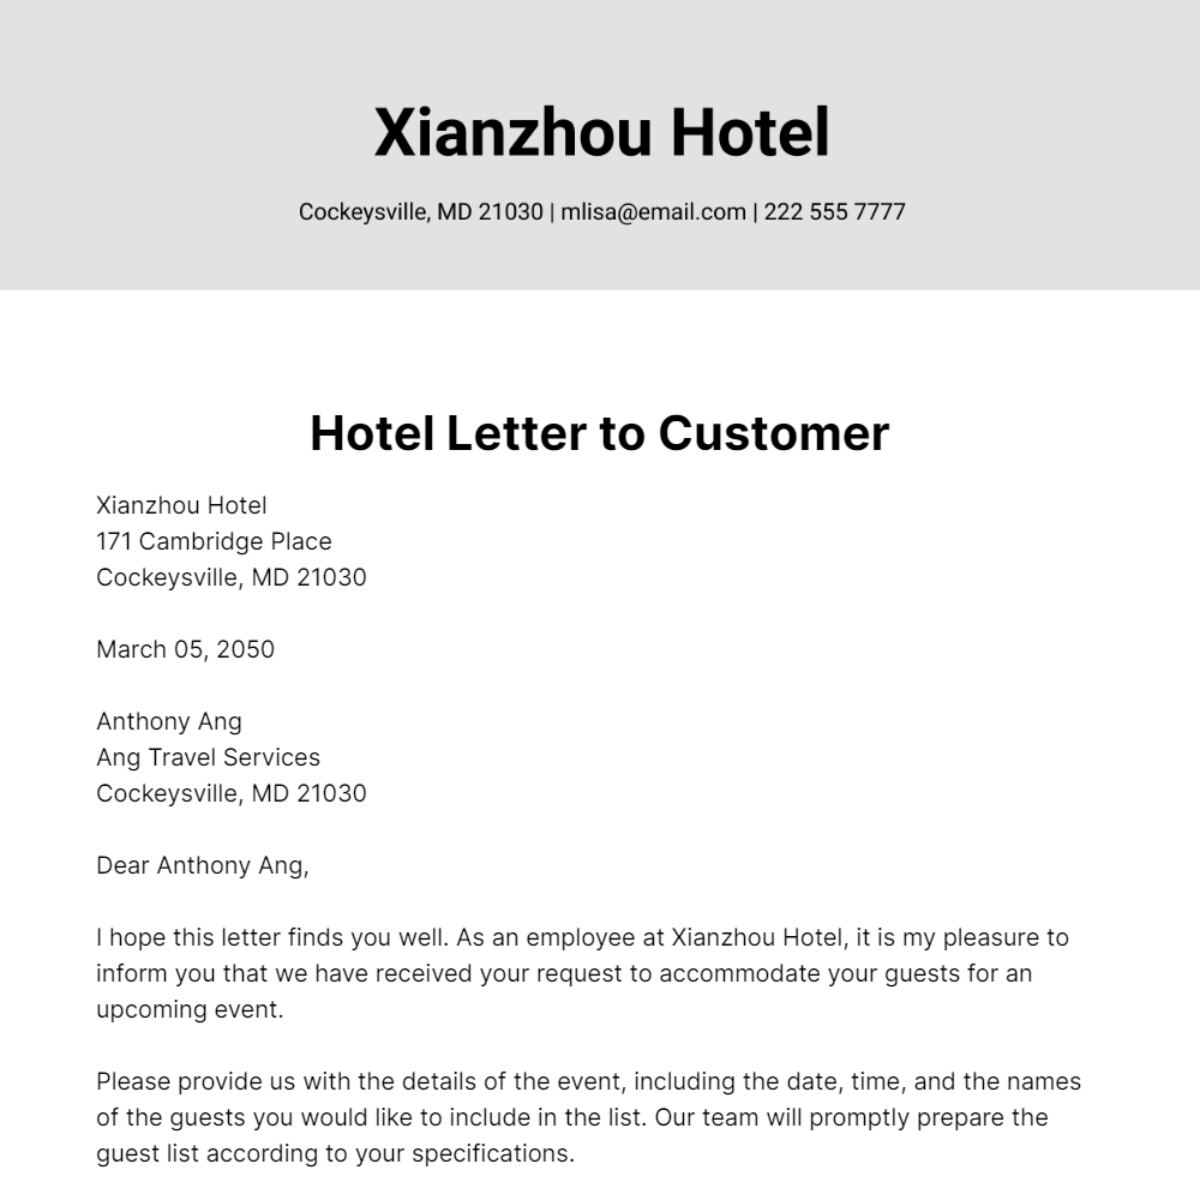 Hotel Letter to Customer   Template